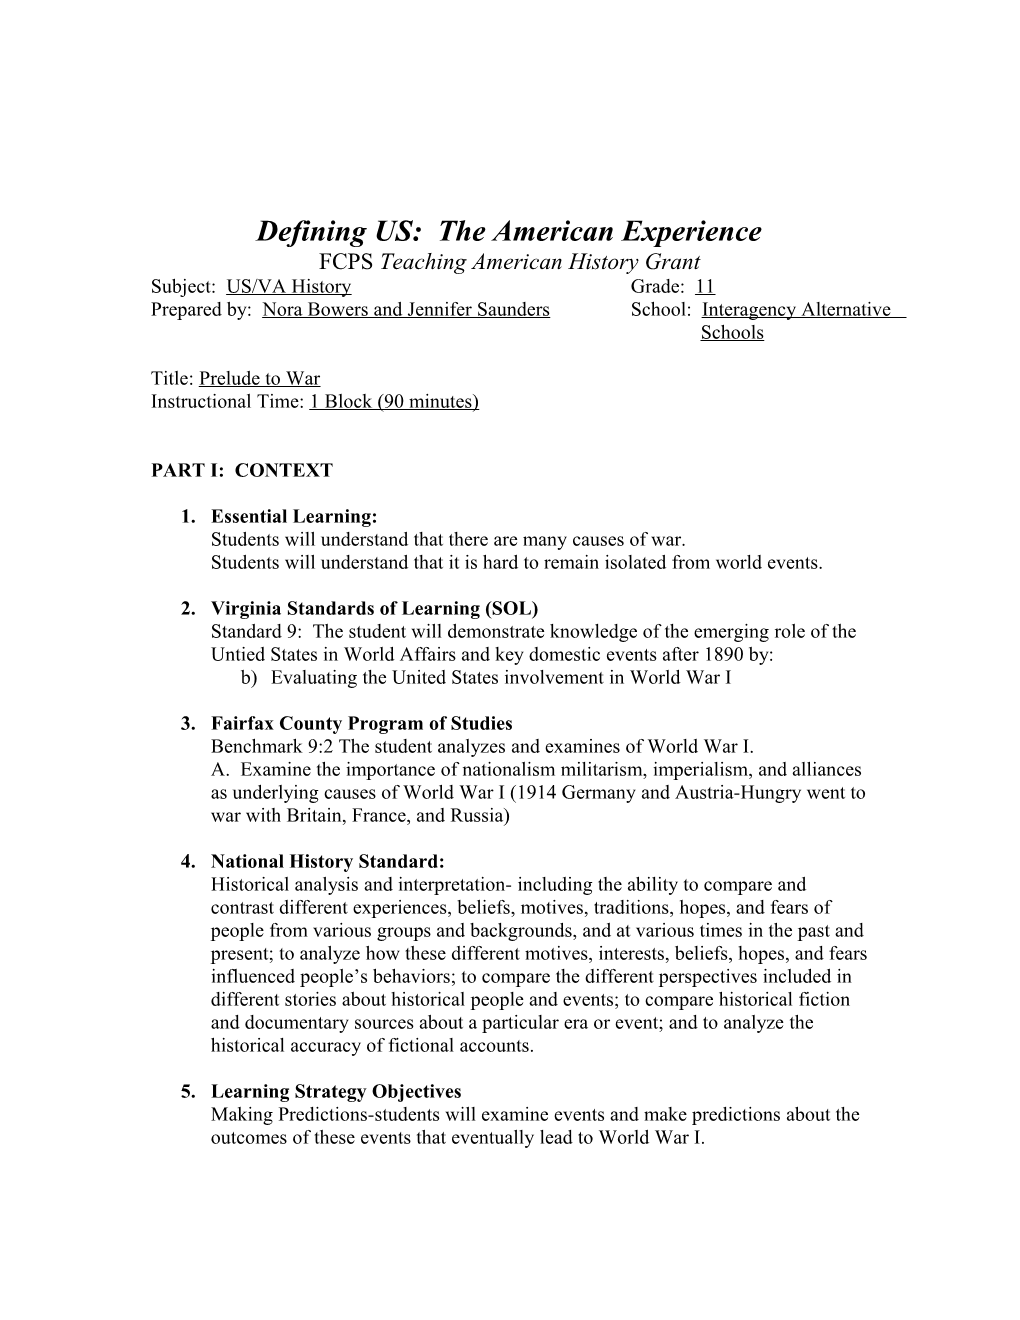 Defining US: the American Experience s1